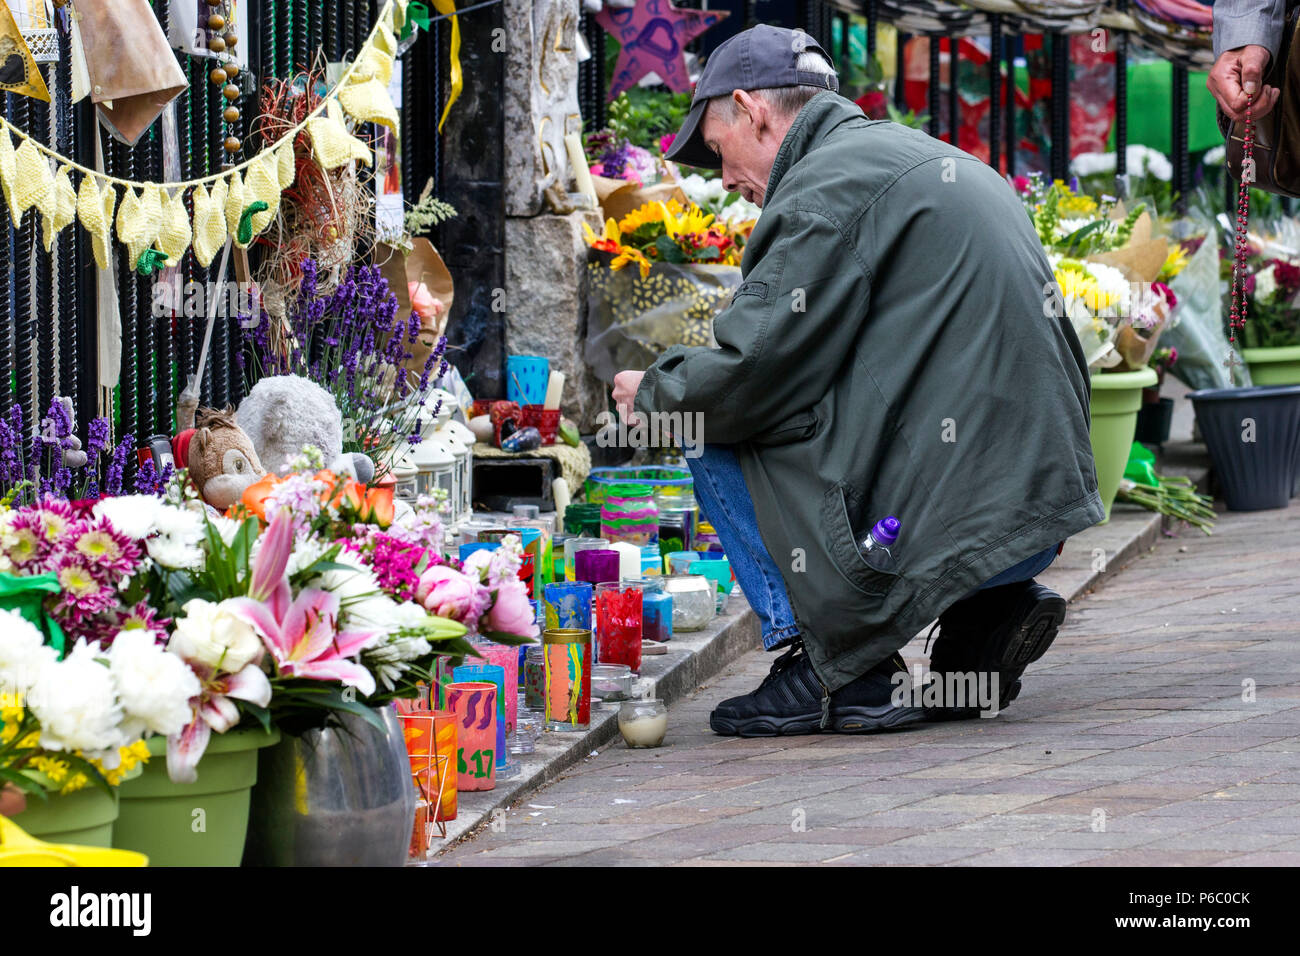 The first anniversary of the 24-storey Grenfell Tower block of public housing flats fire which claimed 72 lives. Man paying his respects at a memorial outside a church near the tower block.  South Kensington, London, UK, 14th June 2018. Stock Photo